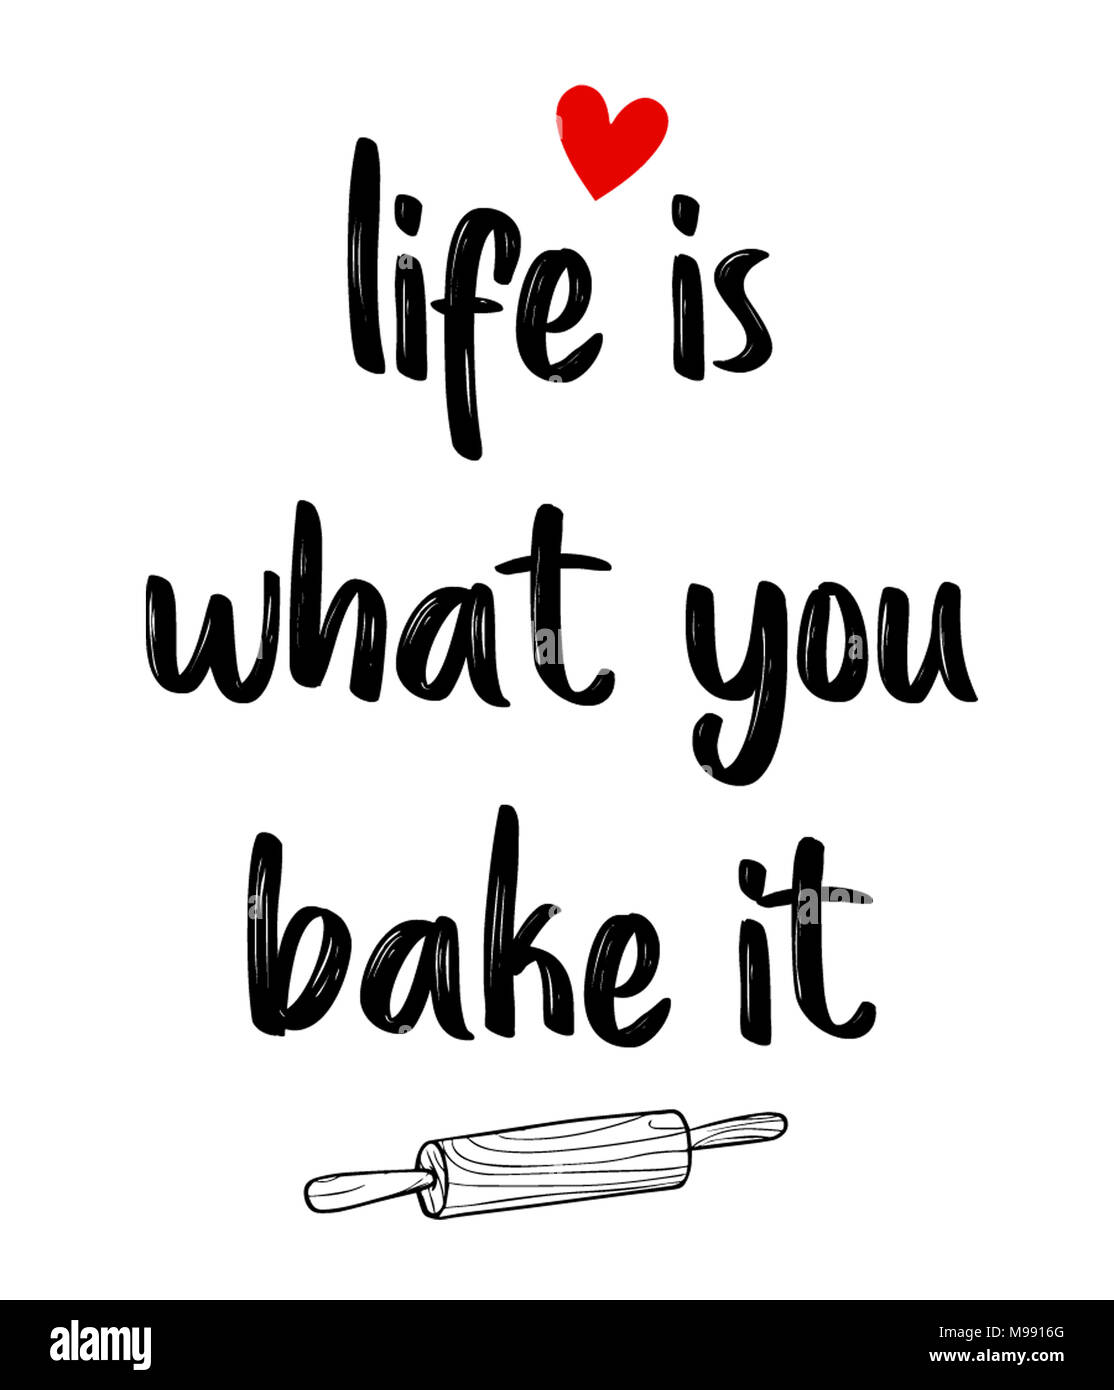 life is what you bake it Stock Photo